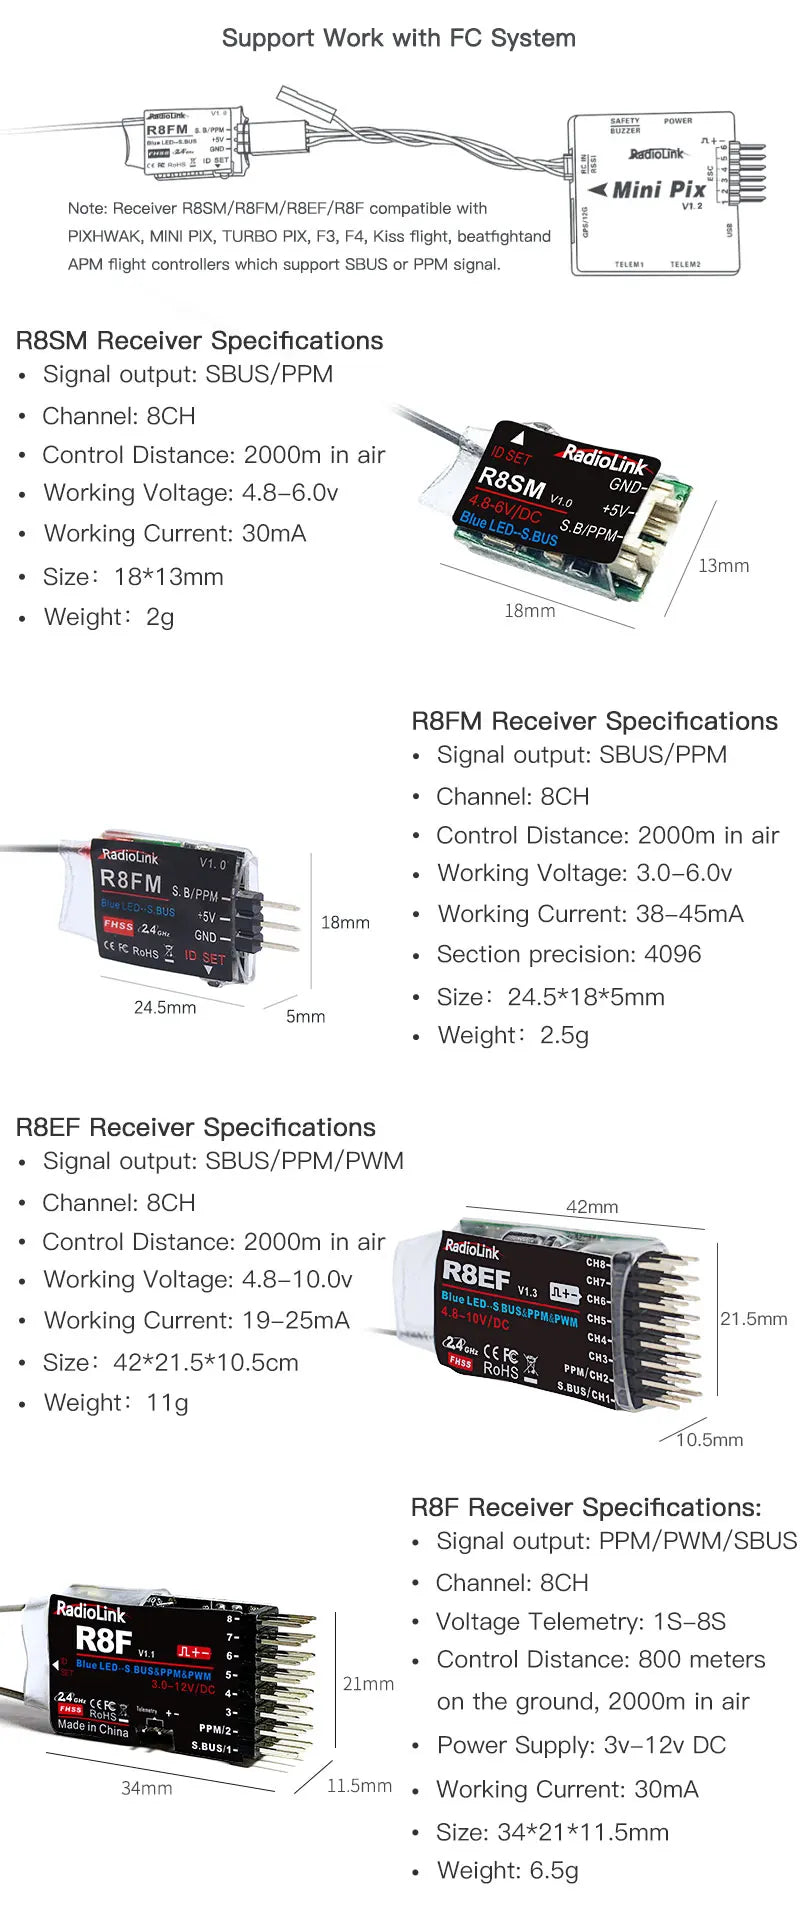 Radiolink T8S, RBFM/RBEF/R8F compatible with PIXHWAK,